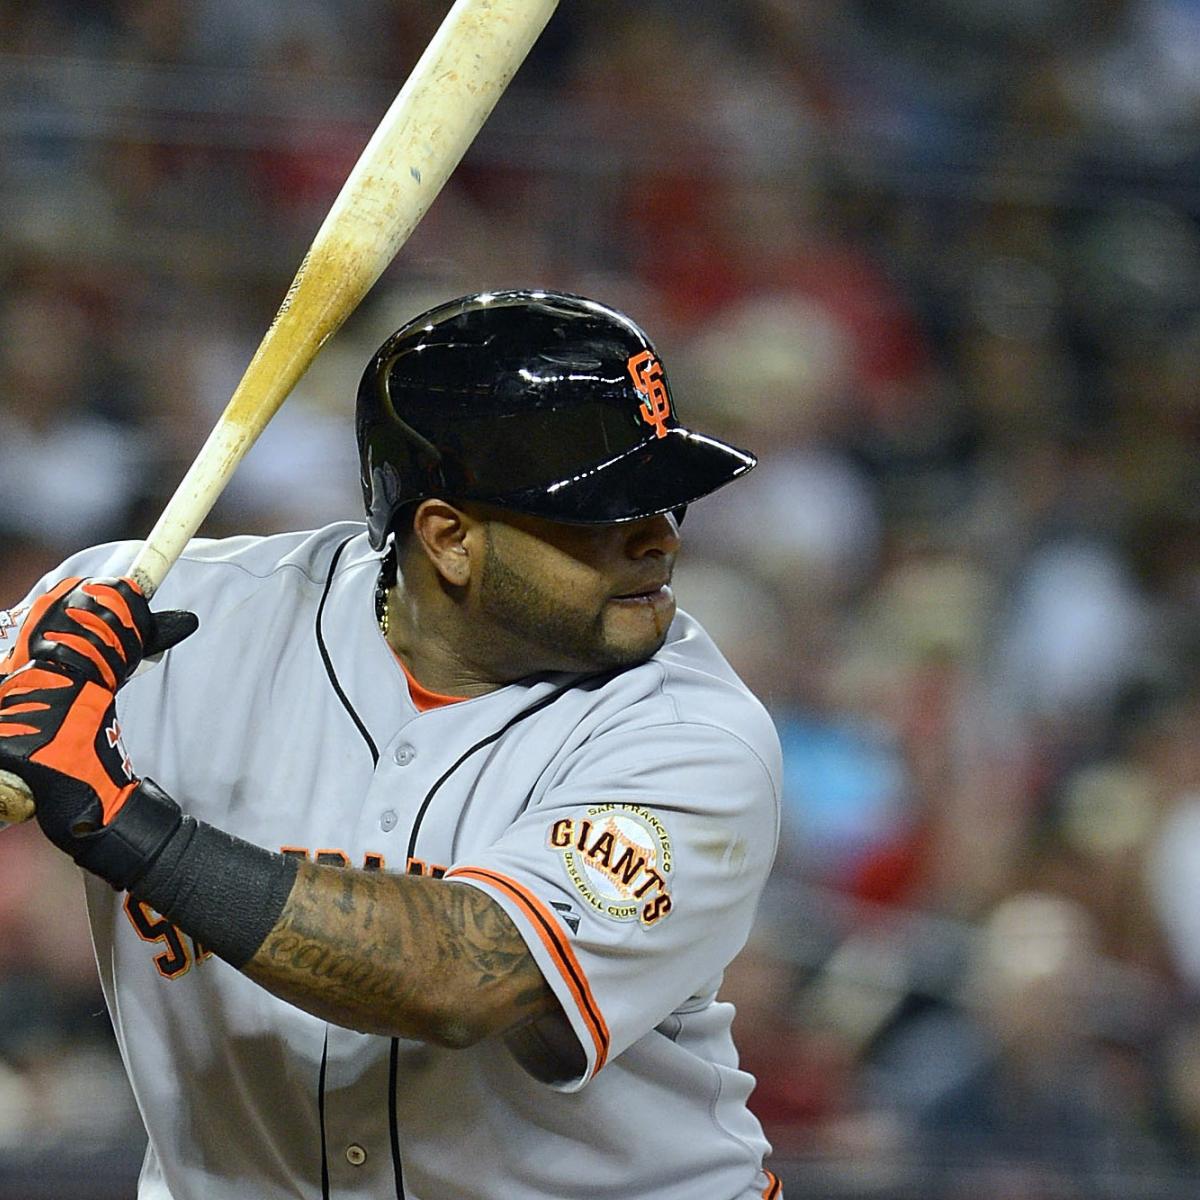 Pablo Sandoval's Belt Lost Its Will to Live Mid-Swing